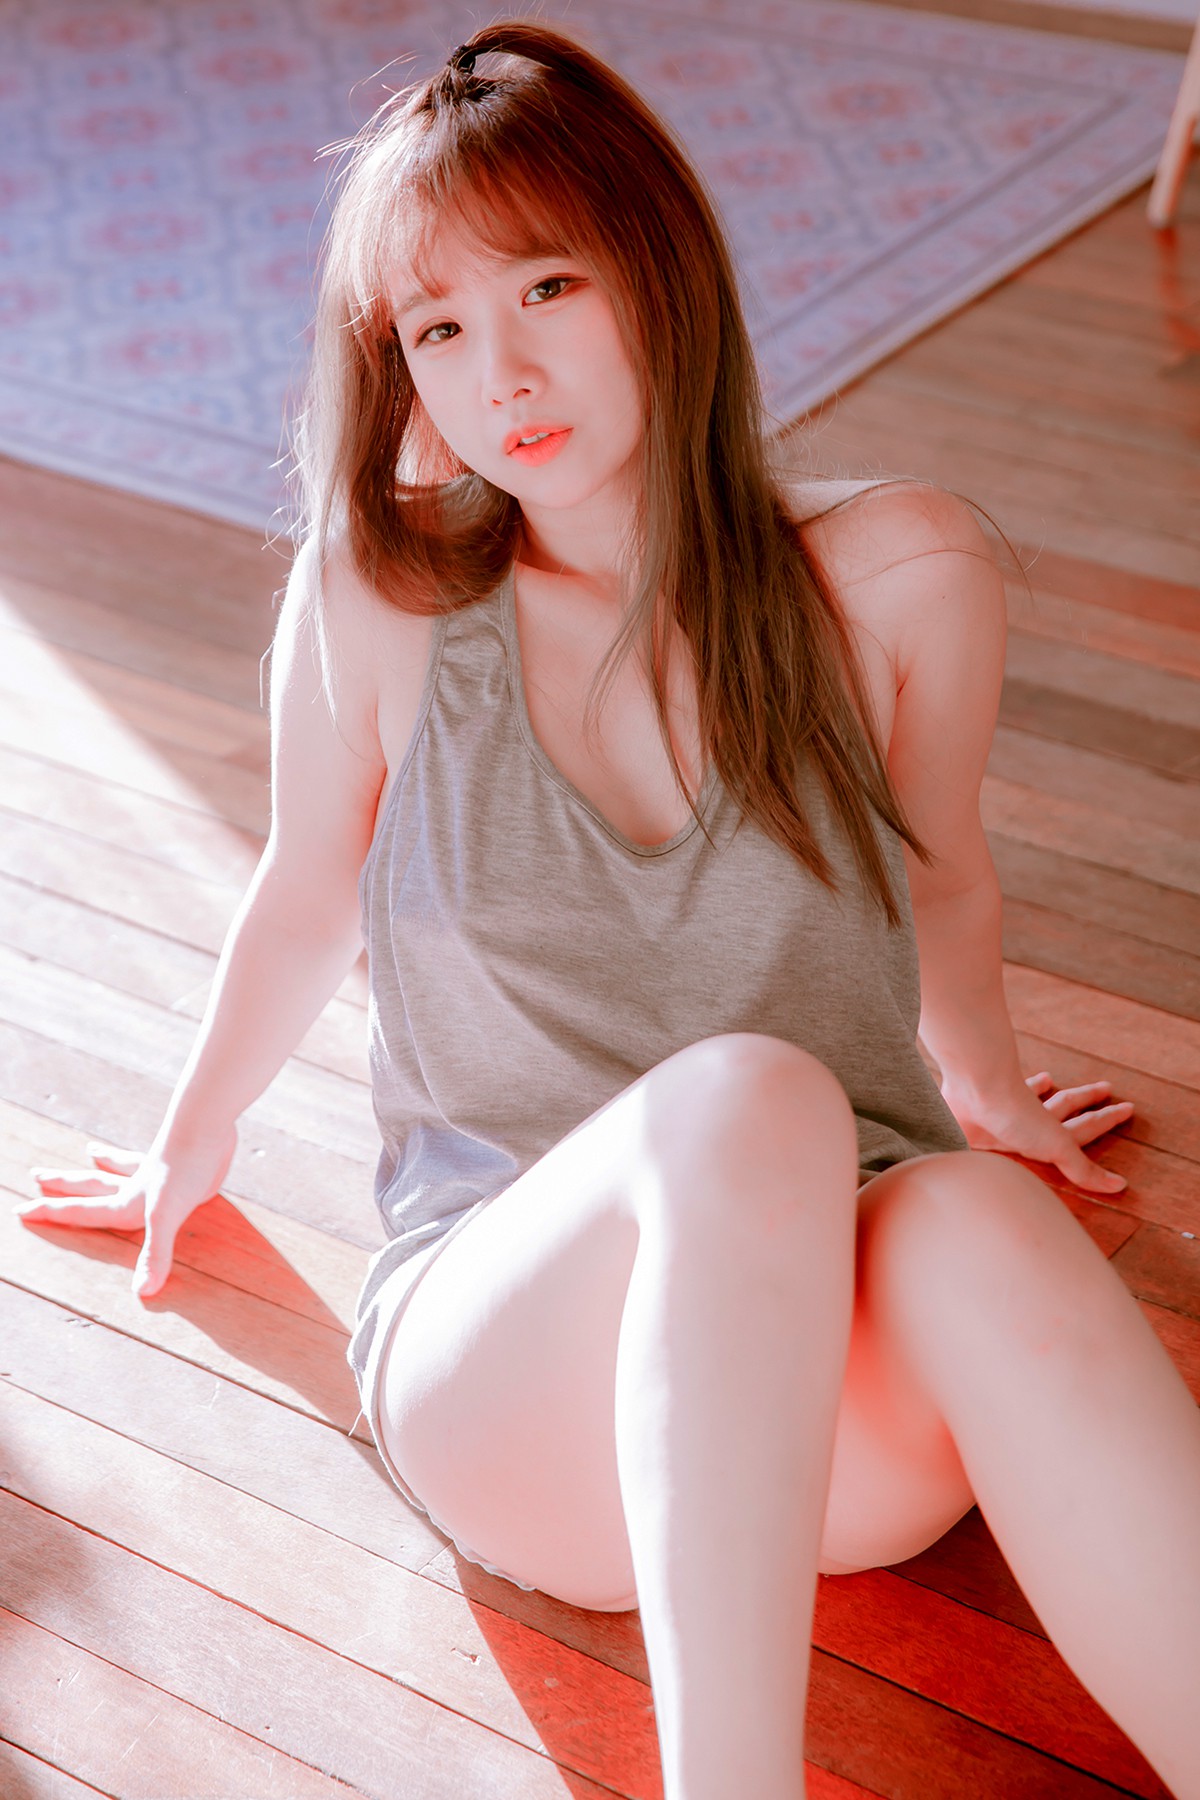 JOApictures – Mikacho 조미카 x JOA 21. MARCH